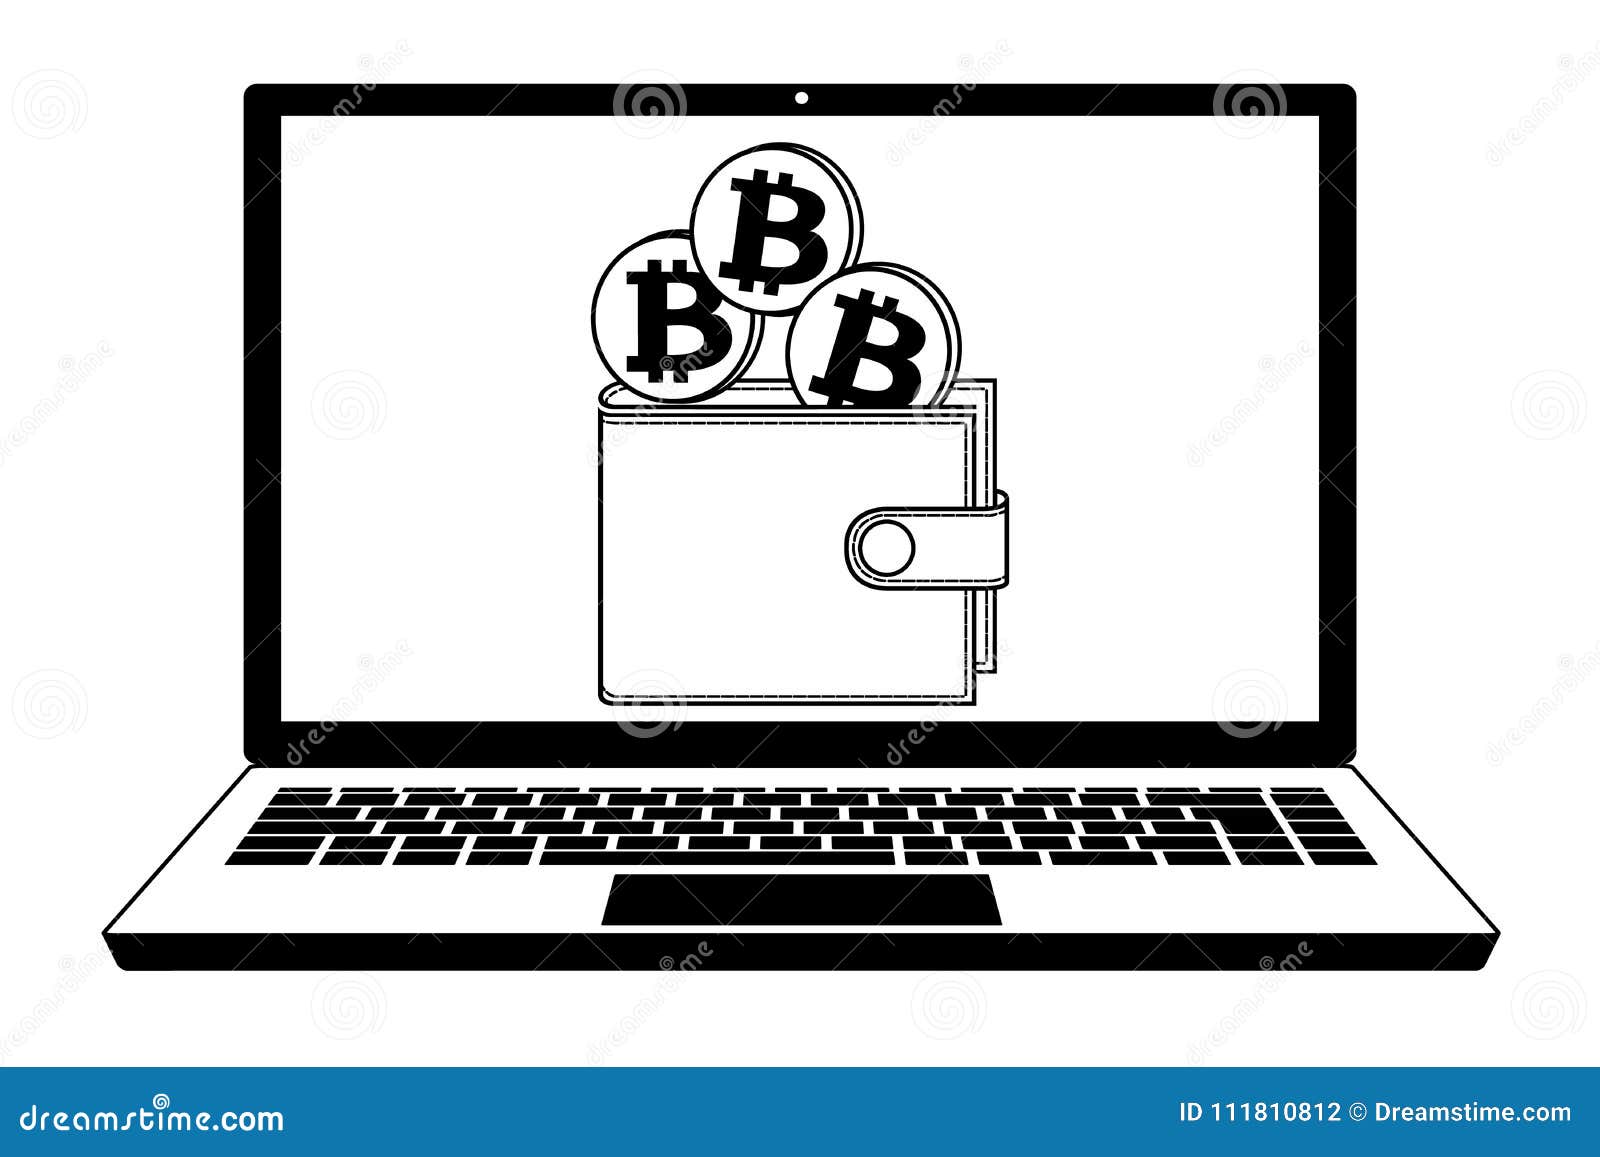 Best Bitcoin Wallets for Desktop/Laptop/Web/Android/iOS